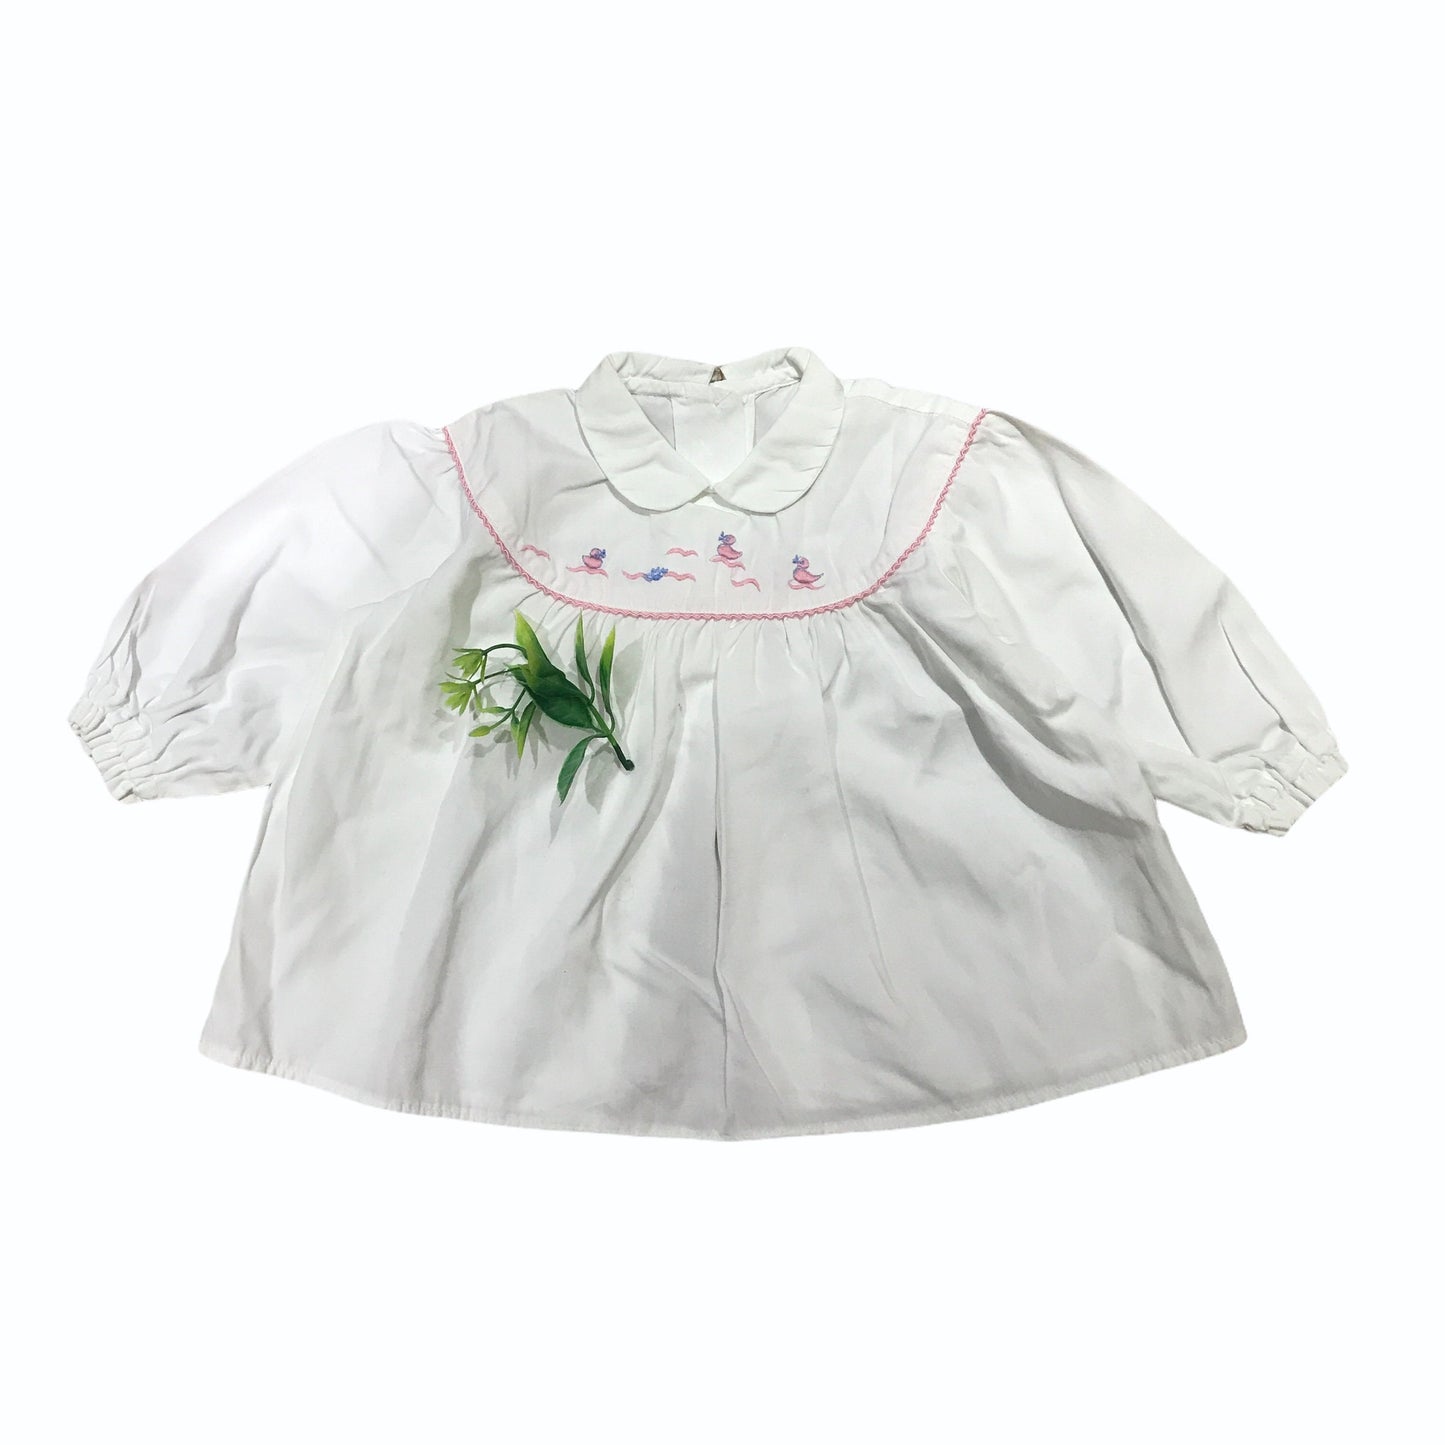 Vintage 60's White "Ducklings" Embroidered Long Sleeve Top / Shirt / Blouse  6-9 Months